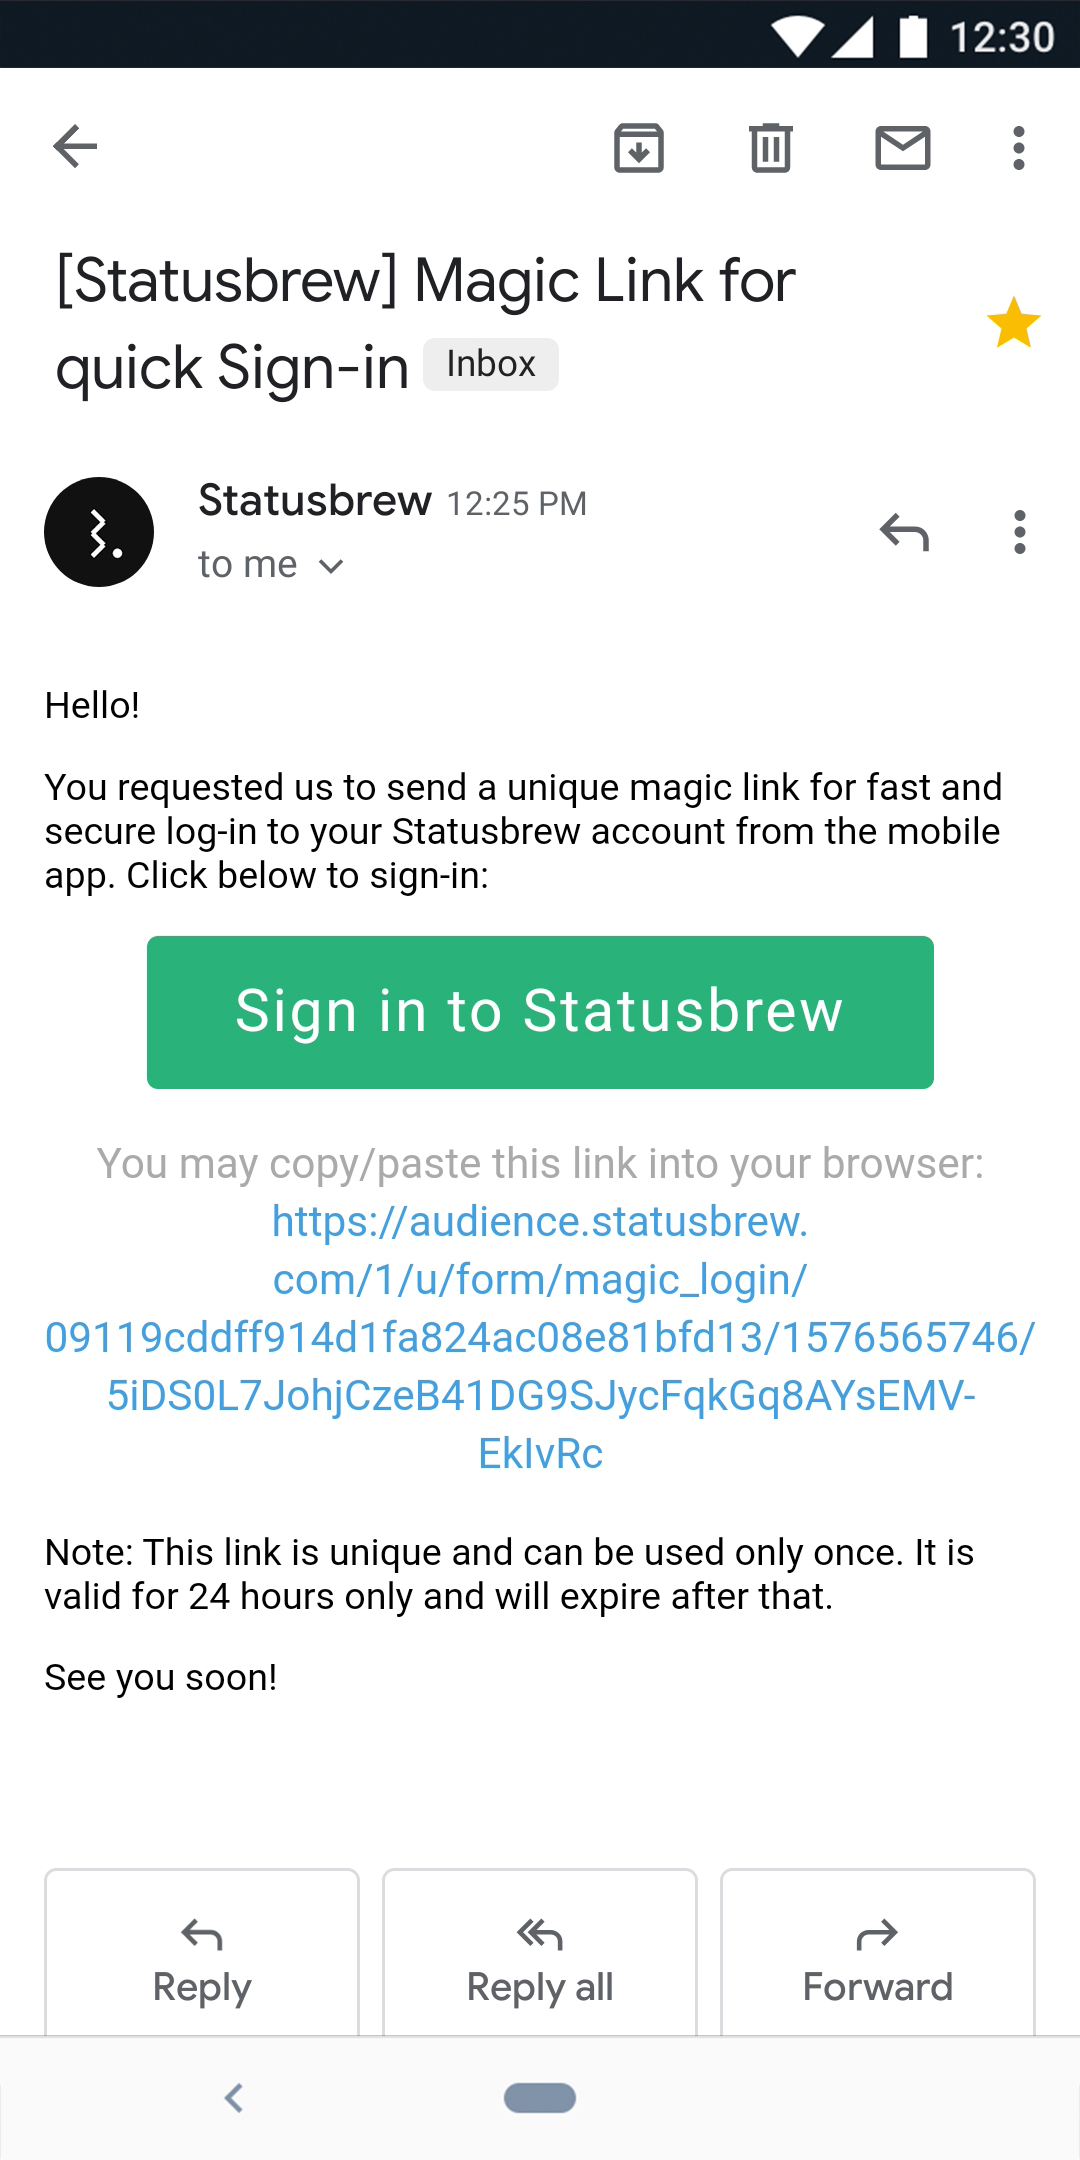 Sign_in_to_Statusbrew_2.jpg